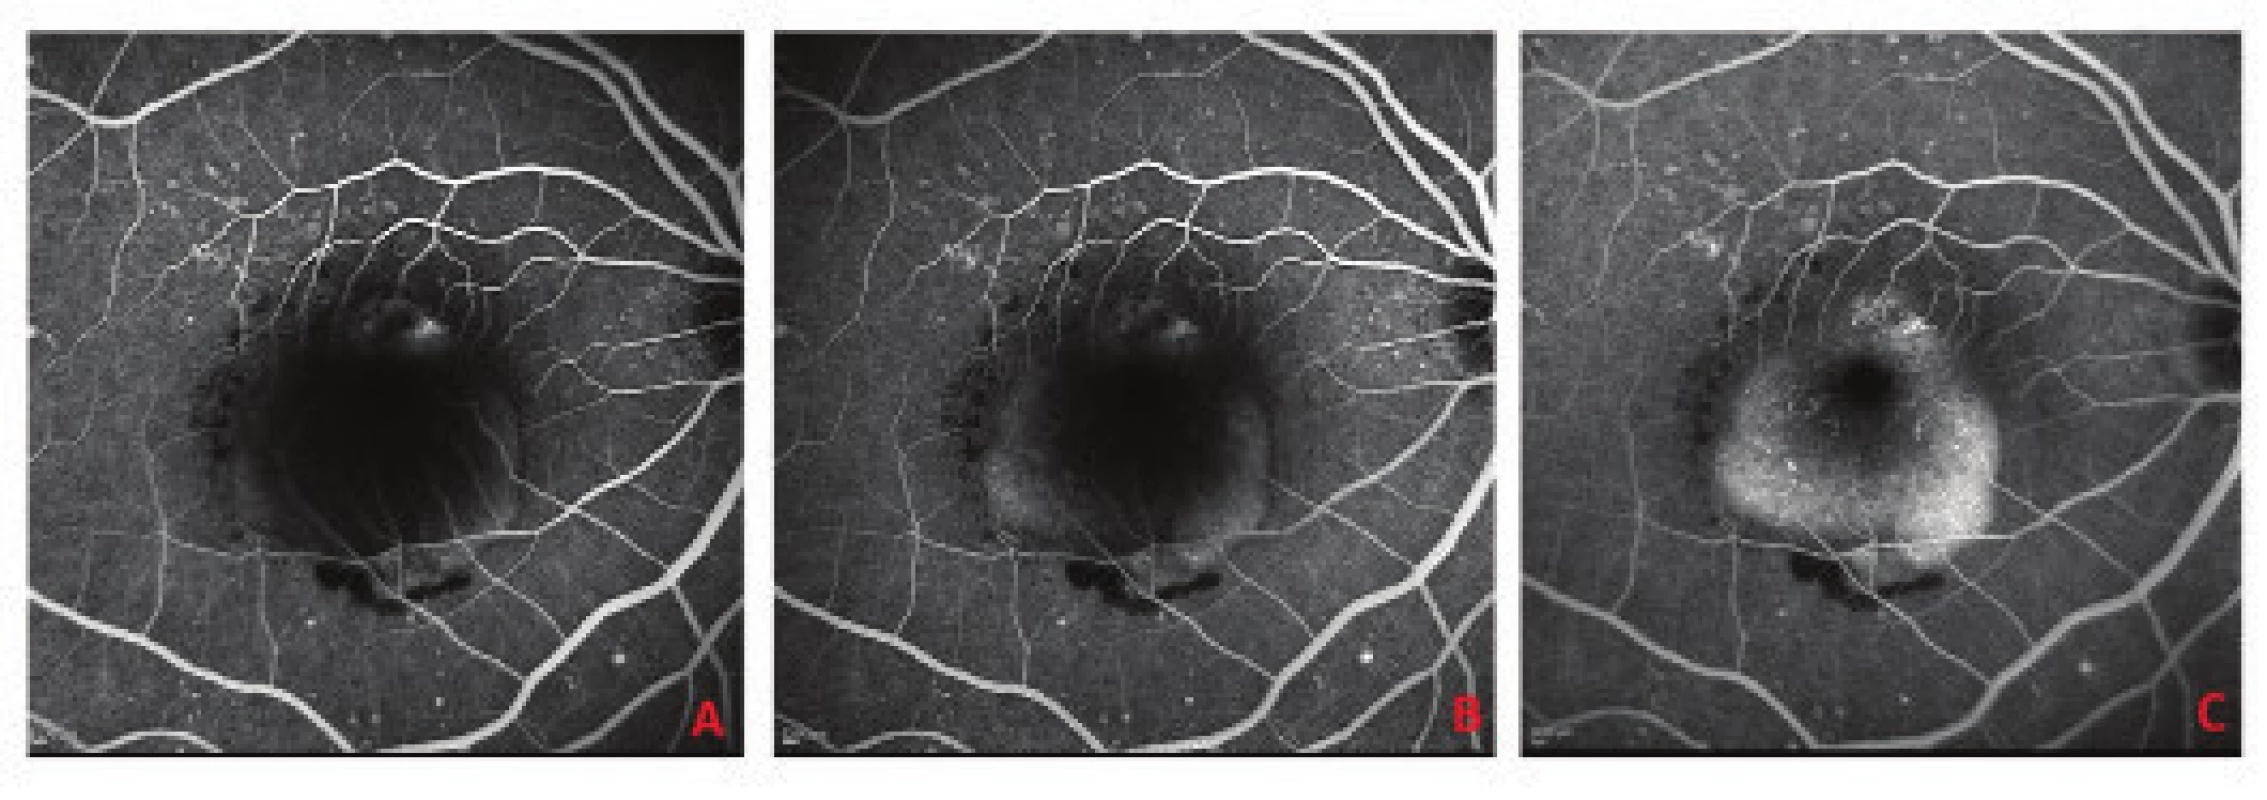 Fluorescence angiography at baseline examination<br>
A. Early phase of fluorescence angiography identifying hyperfluorescent lesion of choroidal neovascularisation with infiltration on the upper edge of the lesion, peripheral filling of RPE detachment, on
lower edge evident hypofluorescence corresponding to haemorrhage<br>
B. Middle phase with progressive filling of deposit of RPE detachment with fluorescein<br>
C. Late phase identifying homogeneous hyperfluorescence with sharp edges